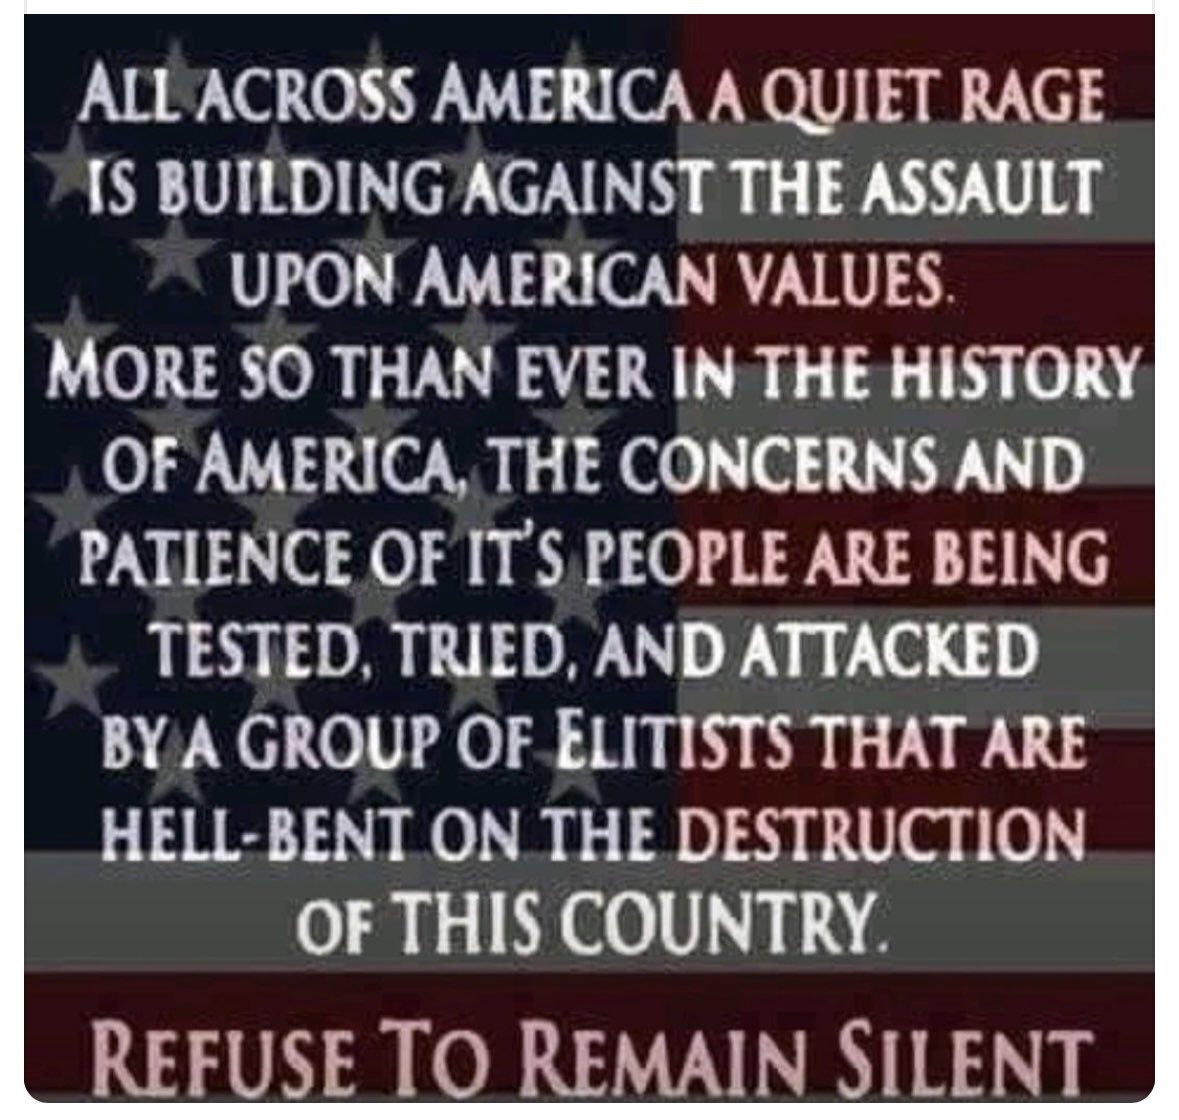 Buongiorno Amici🌹 It’s Tuesday, May 28th, and it’s going to be a great day across America as more Patriots rise up against forces hellbent on destroying our way of life! The Silent Majority is Silent no more! 🤬 🇺🇸🇺🇸🇺🇸🇺🇸🇺🇸🇺🇸🇺🇸🇺🇸🇺🇸🇺🇸🇺🇸